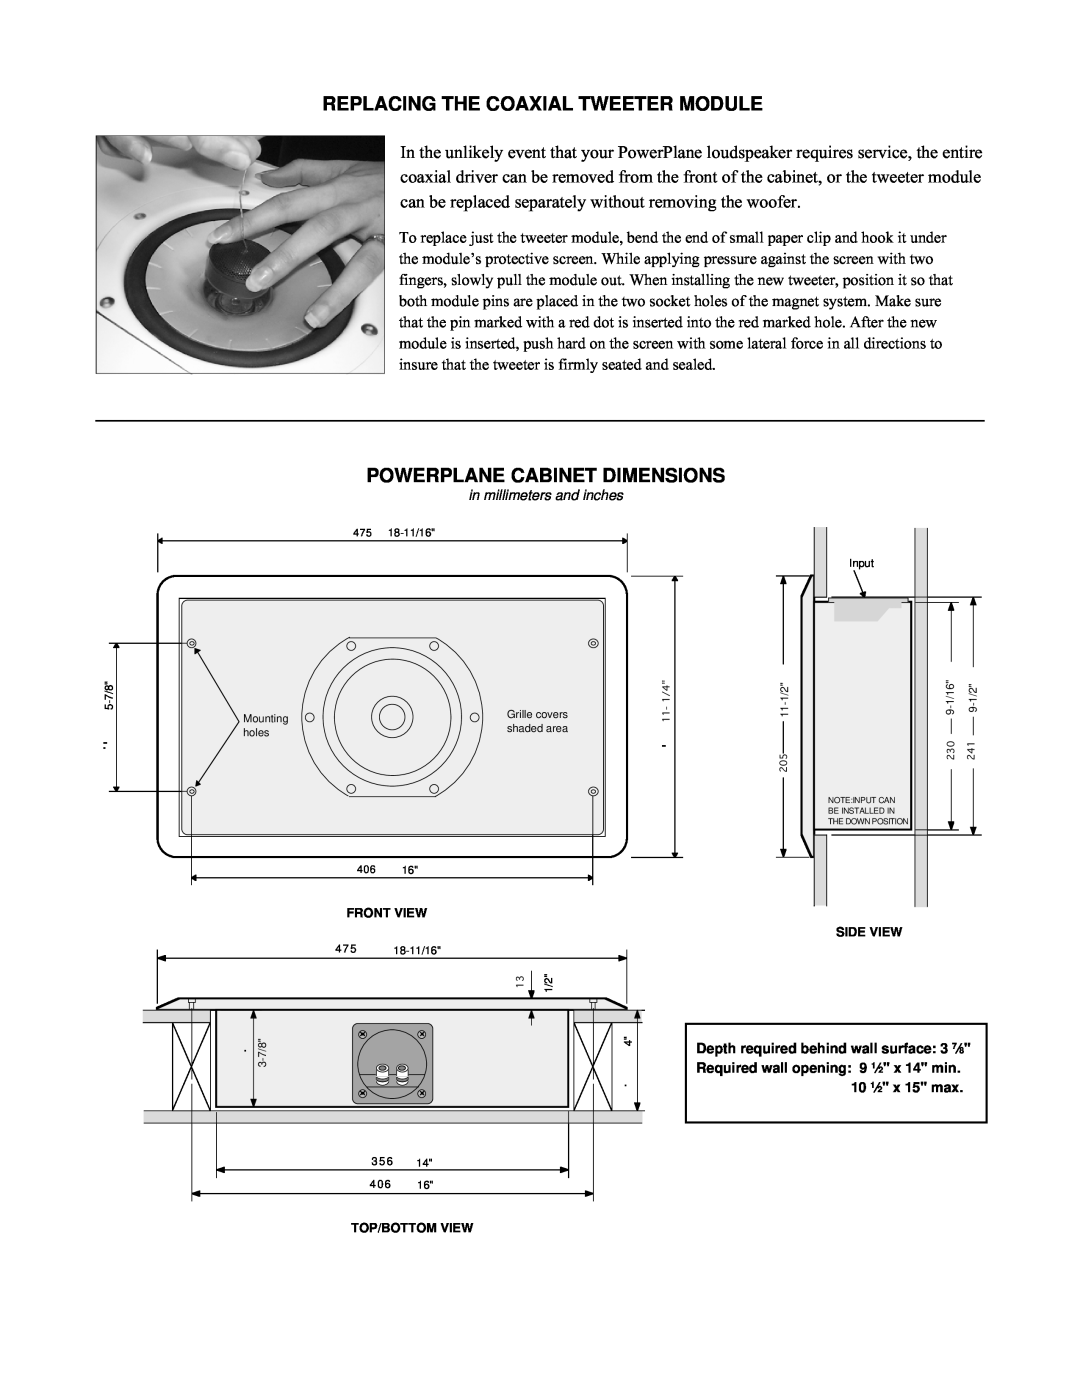 Thiel Audio Products PowerPlane manual Replacing The Coaxial Tweeter Module, Powerplane Cabinet Dimensions 